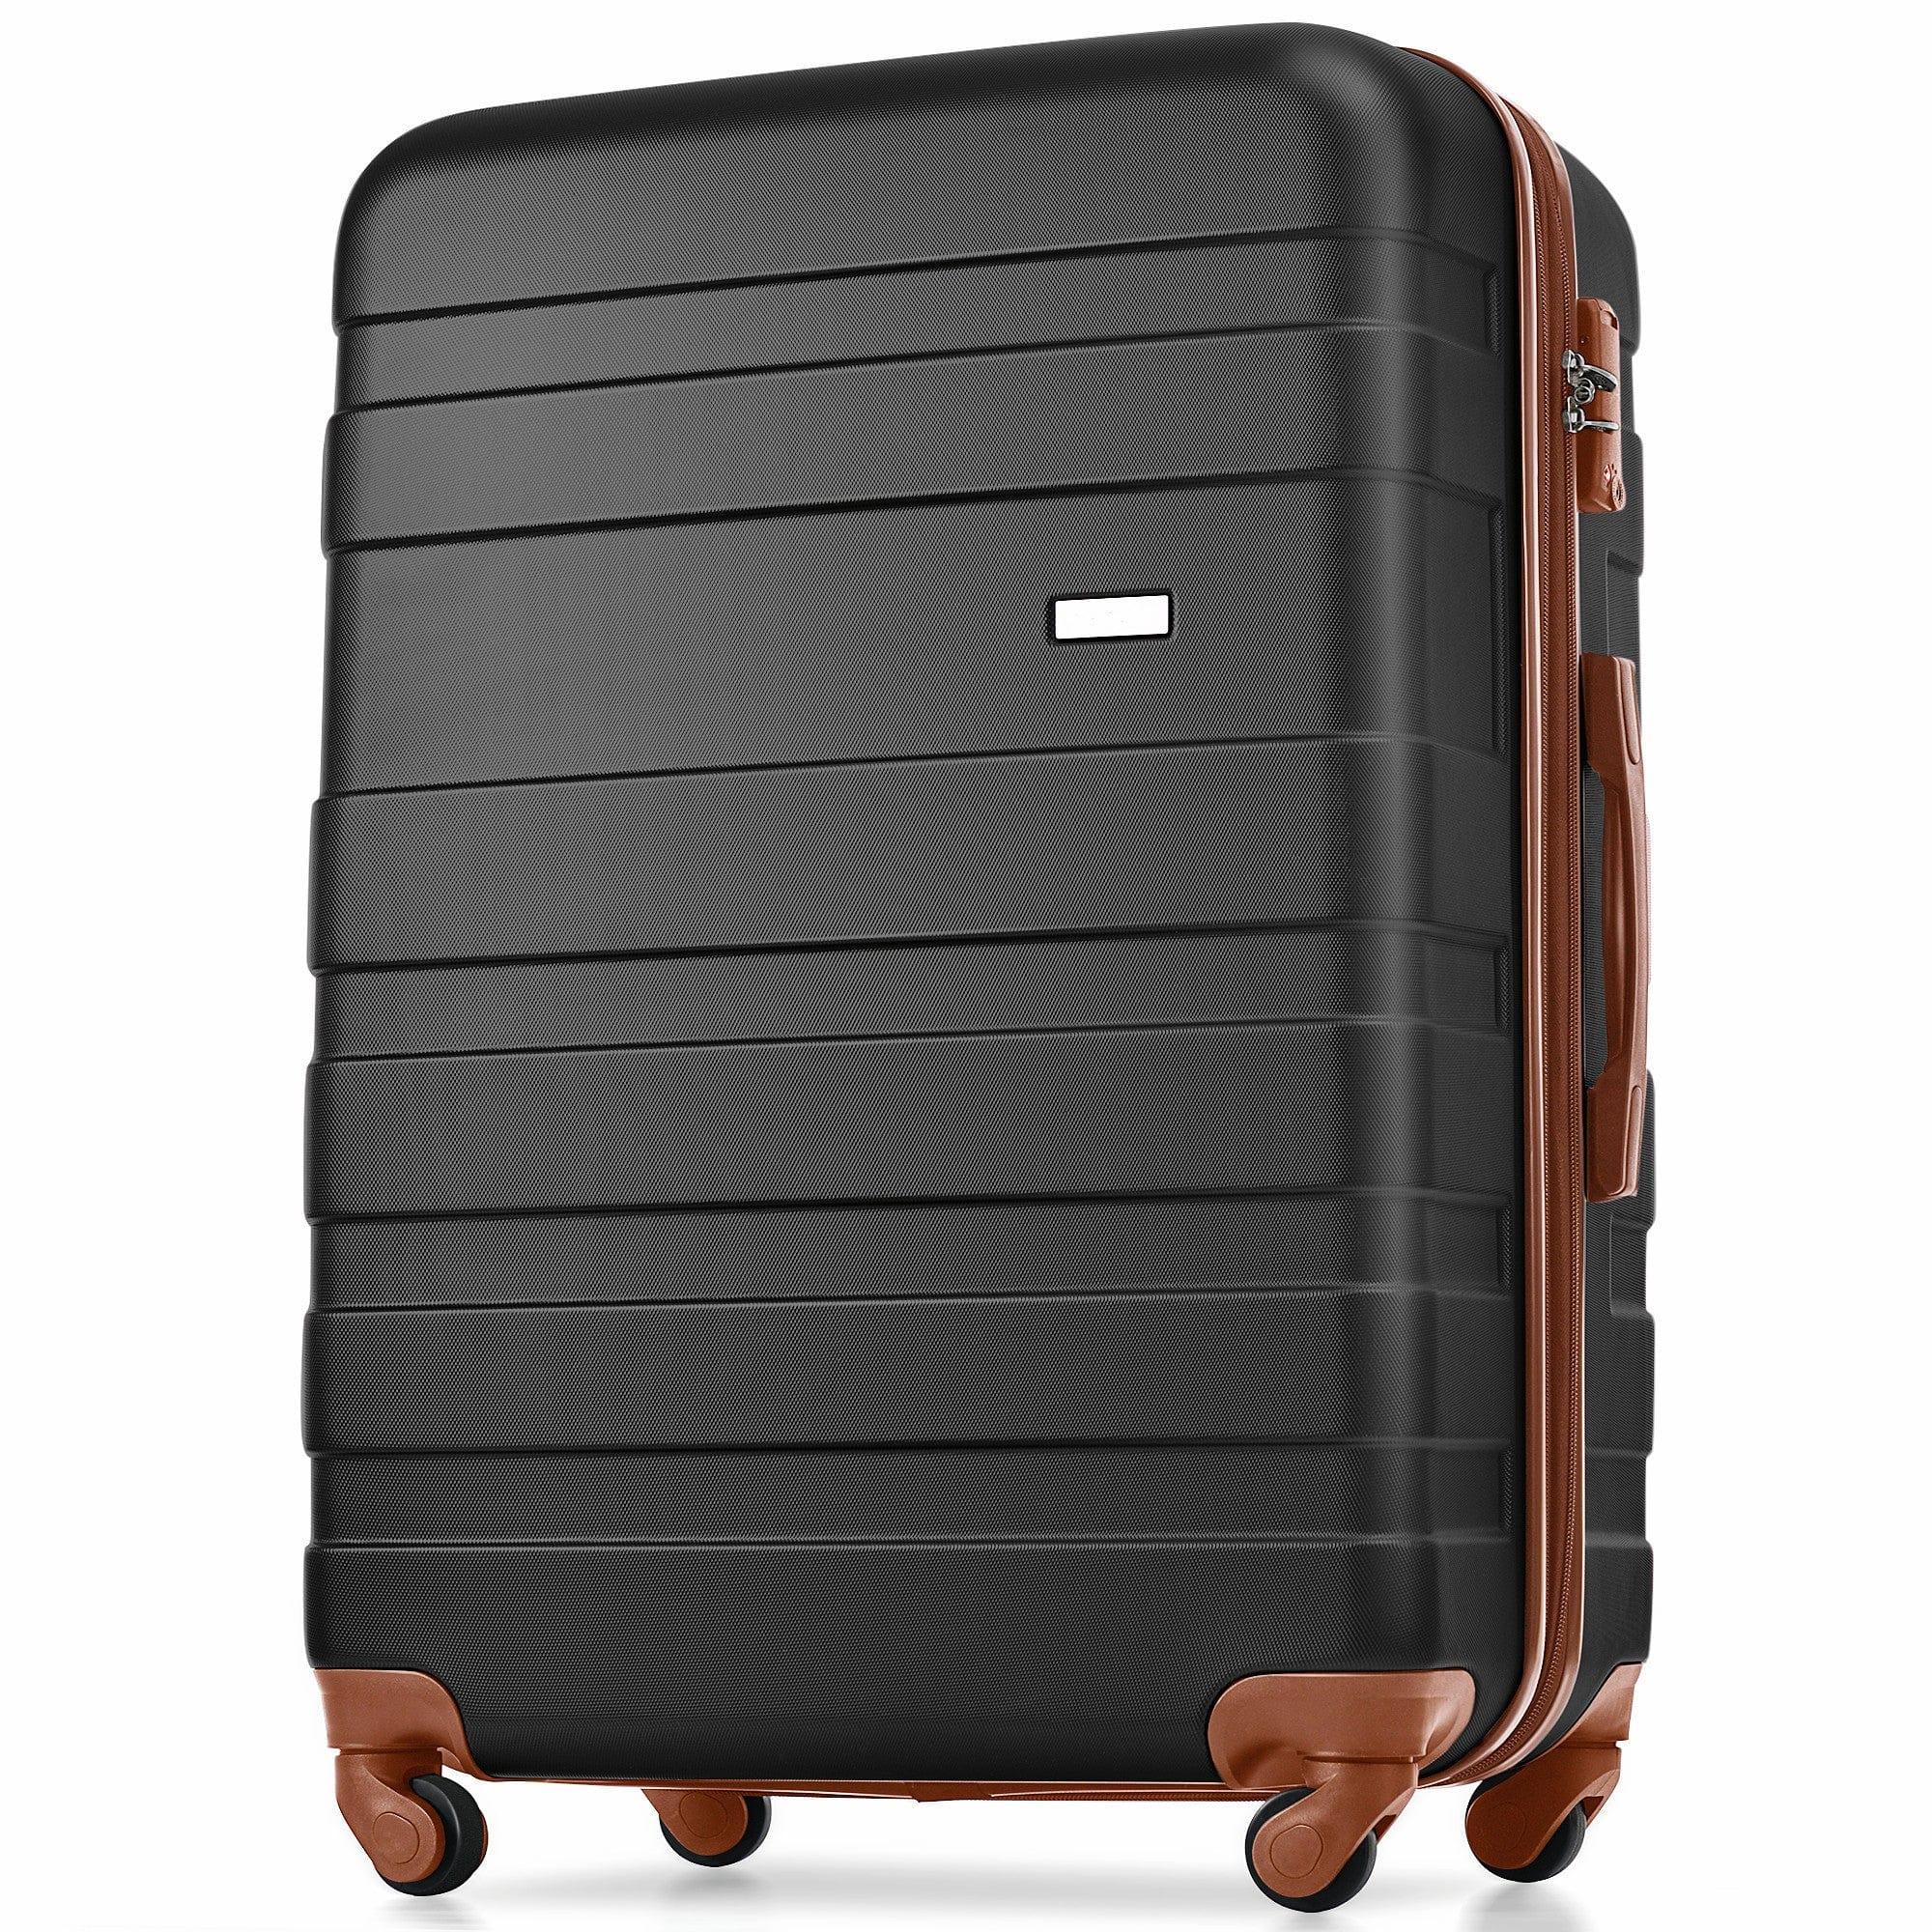 Shop Luggage Sets New Model Expandable ABS Hardshell 3pcs Clearance Luggage Hardside Lightweight Durable Suitcase sets Spinner Wheels Suitcase with TSA Lock 20''24''28''(black and brown) Mademoiselle Home Decor